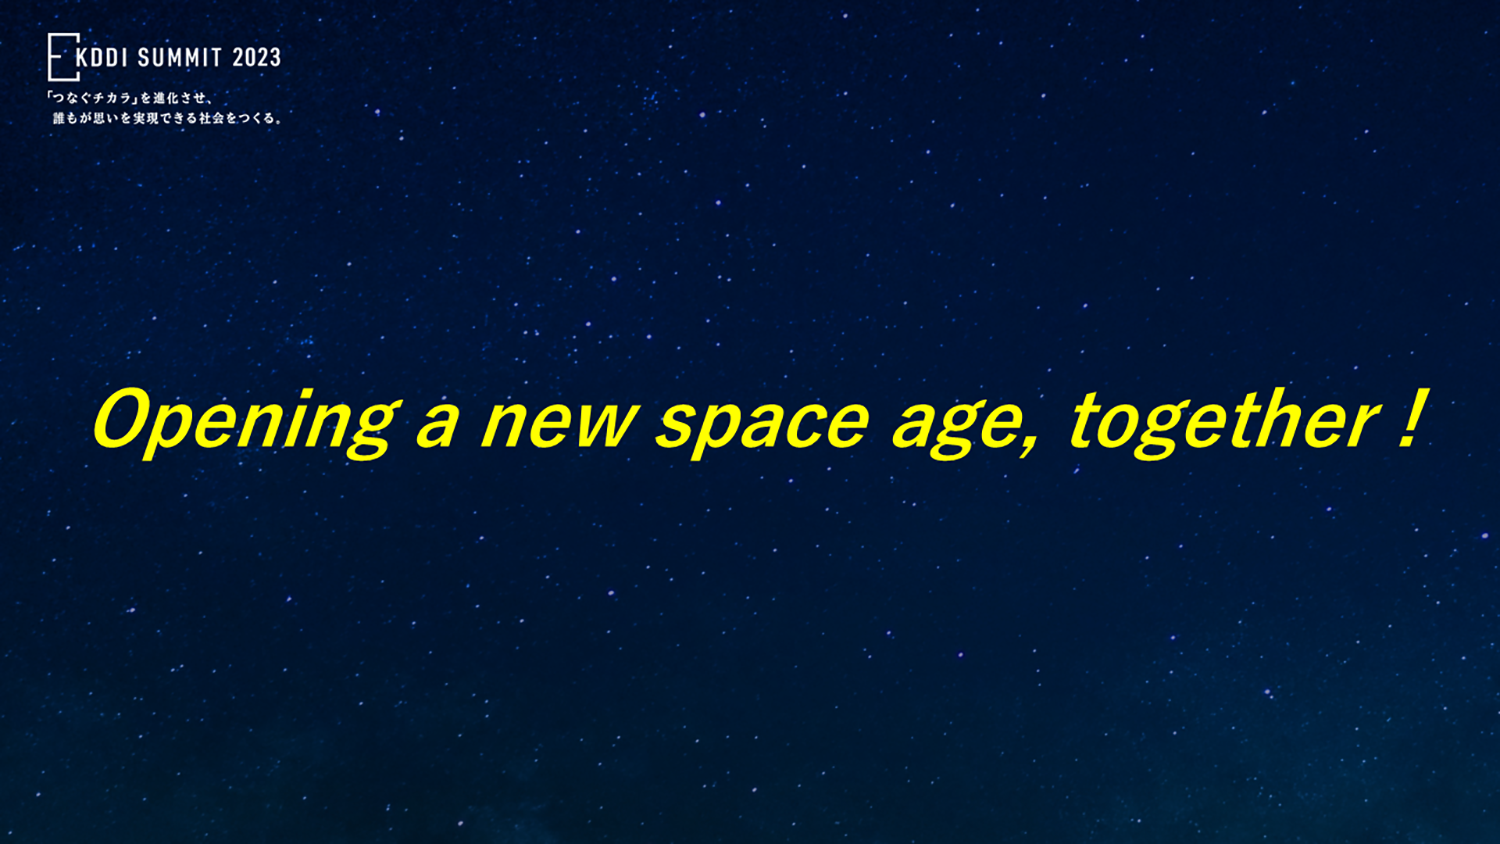 Opening a new space age, together!